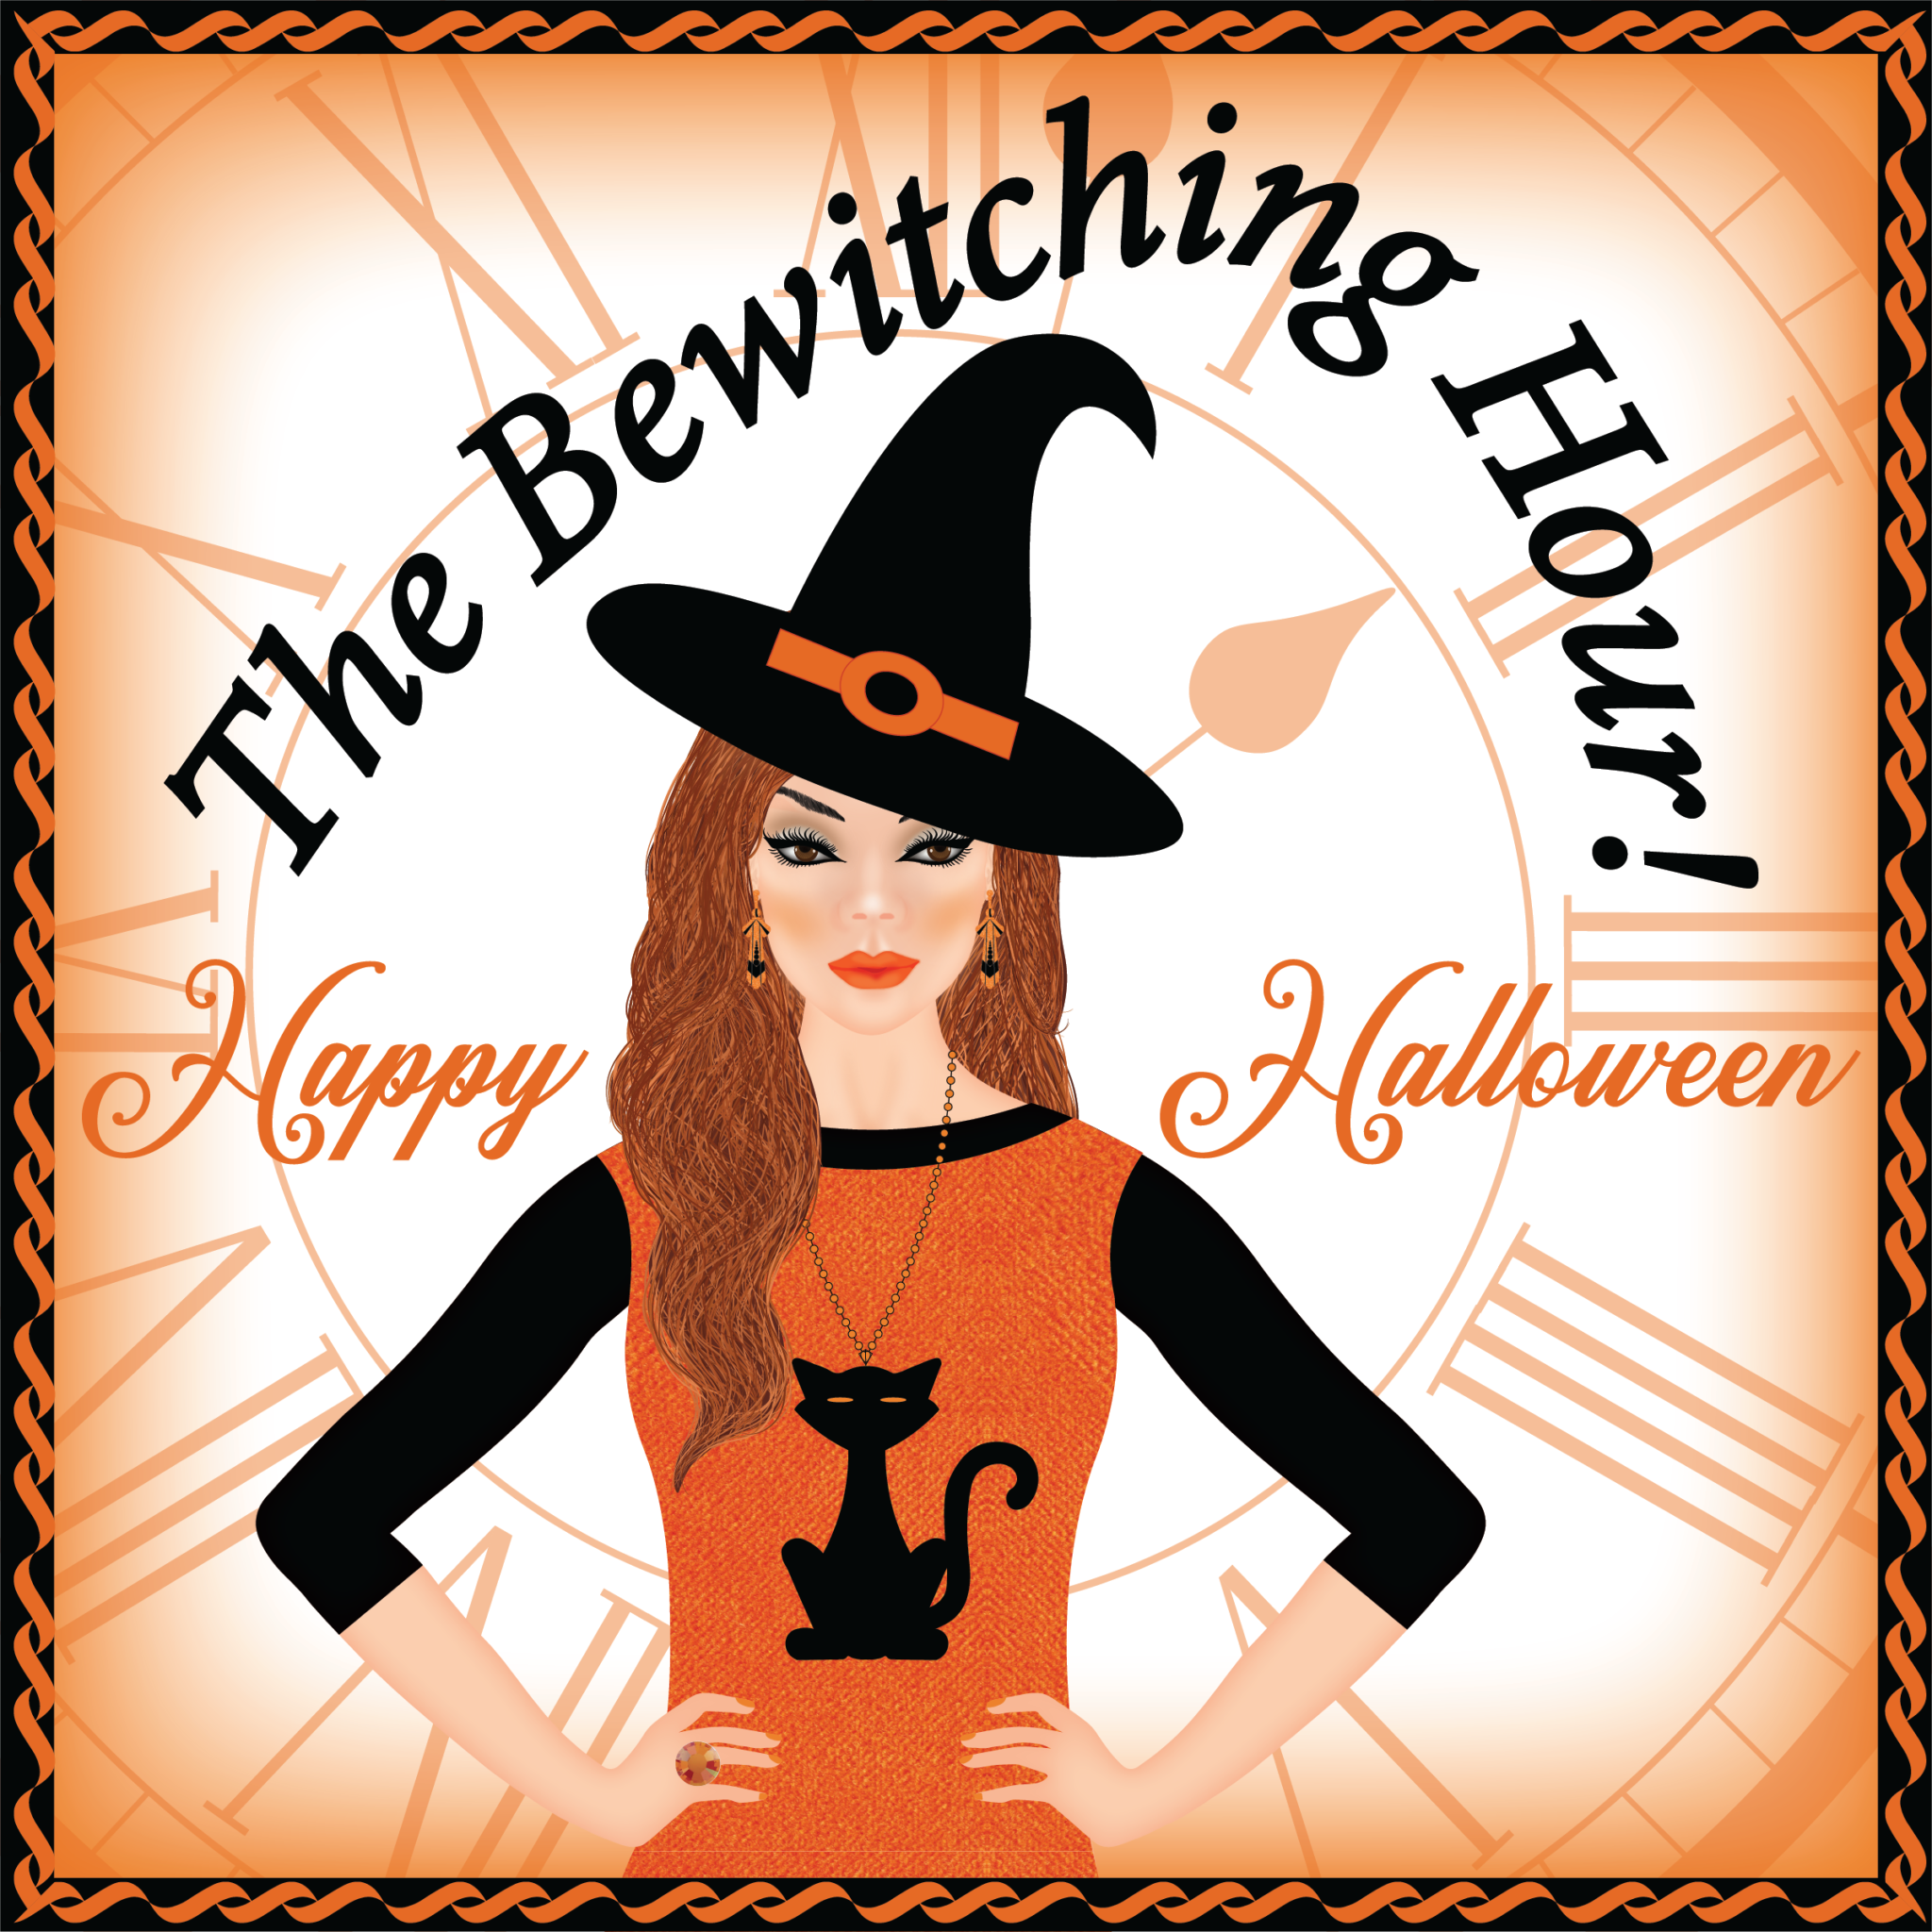 Bewitching Hour